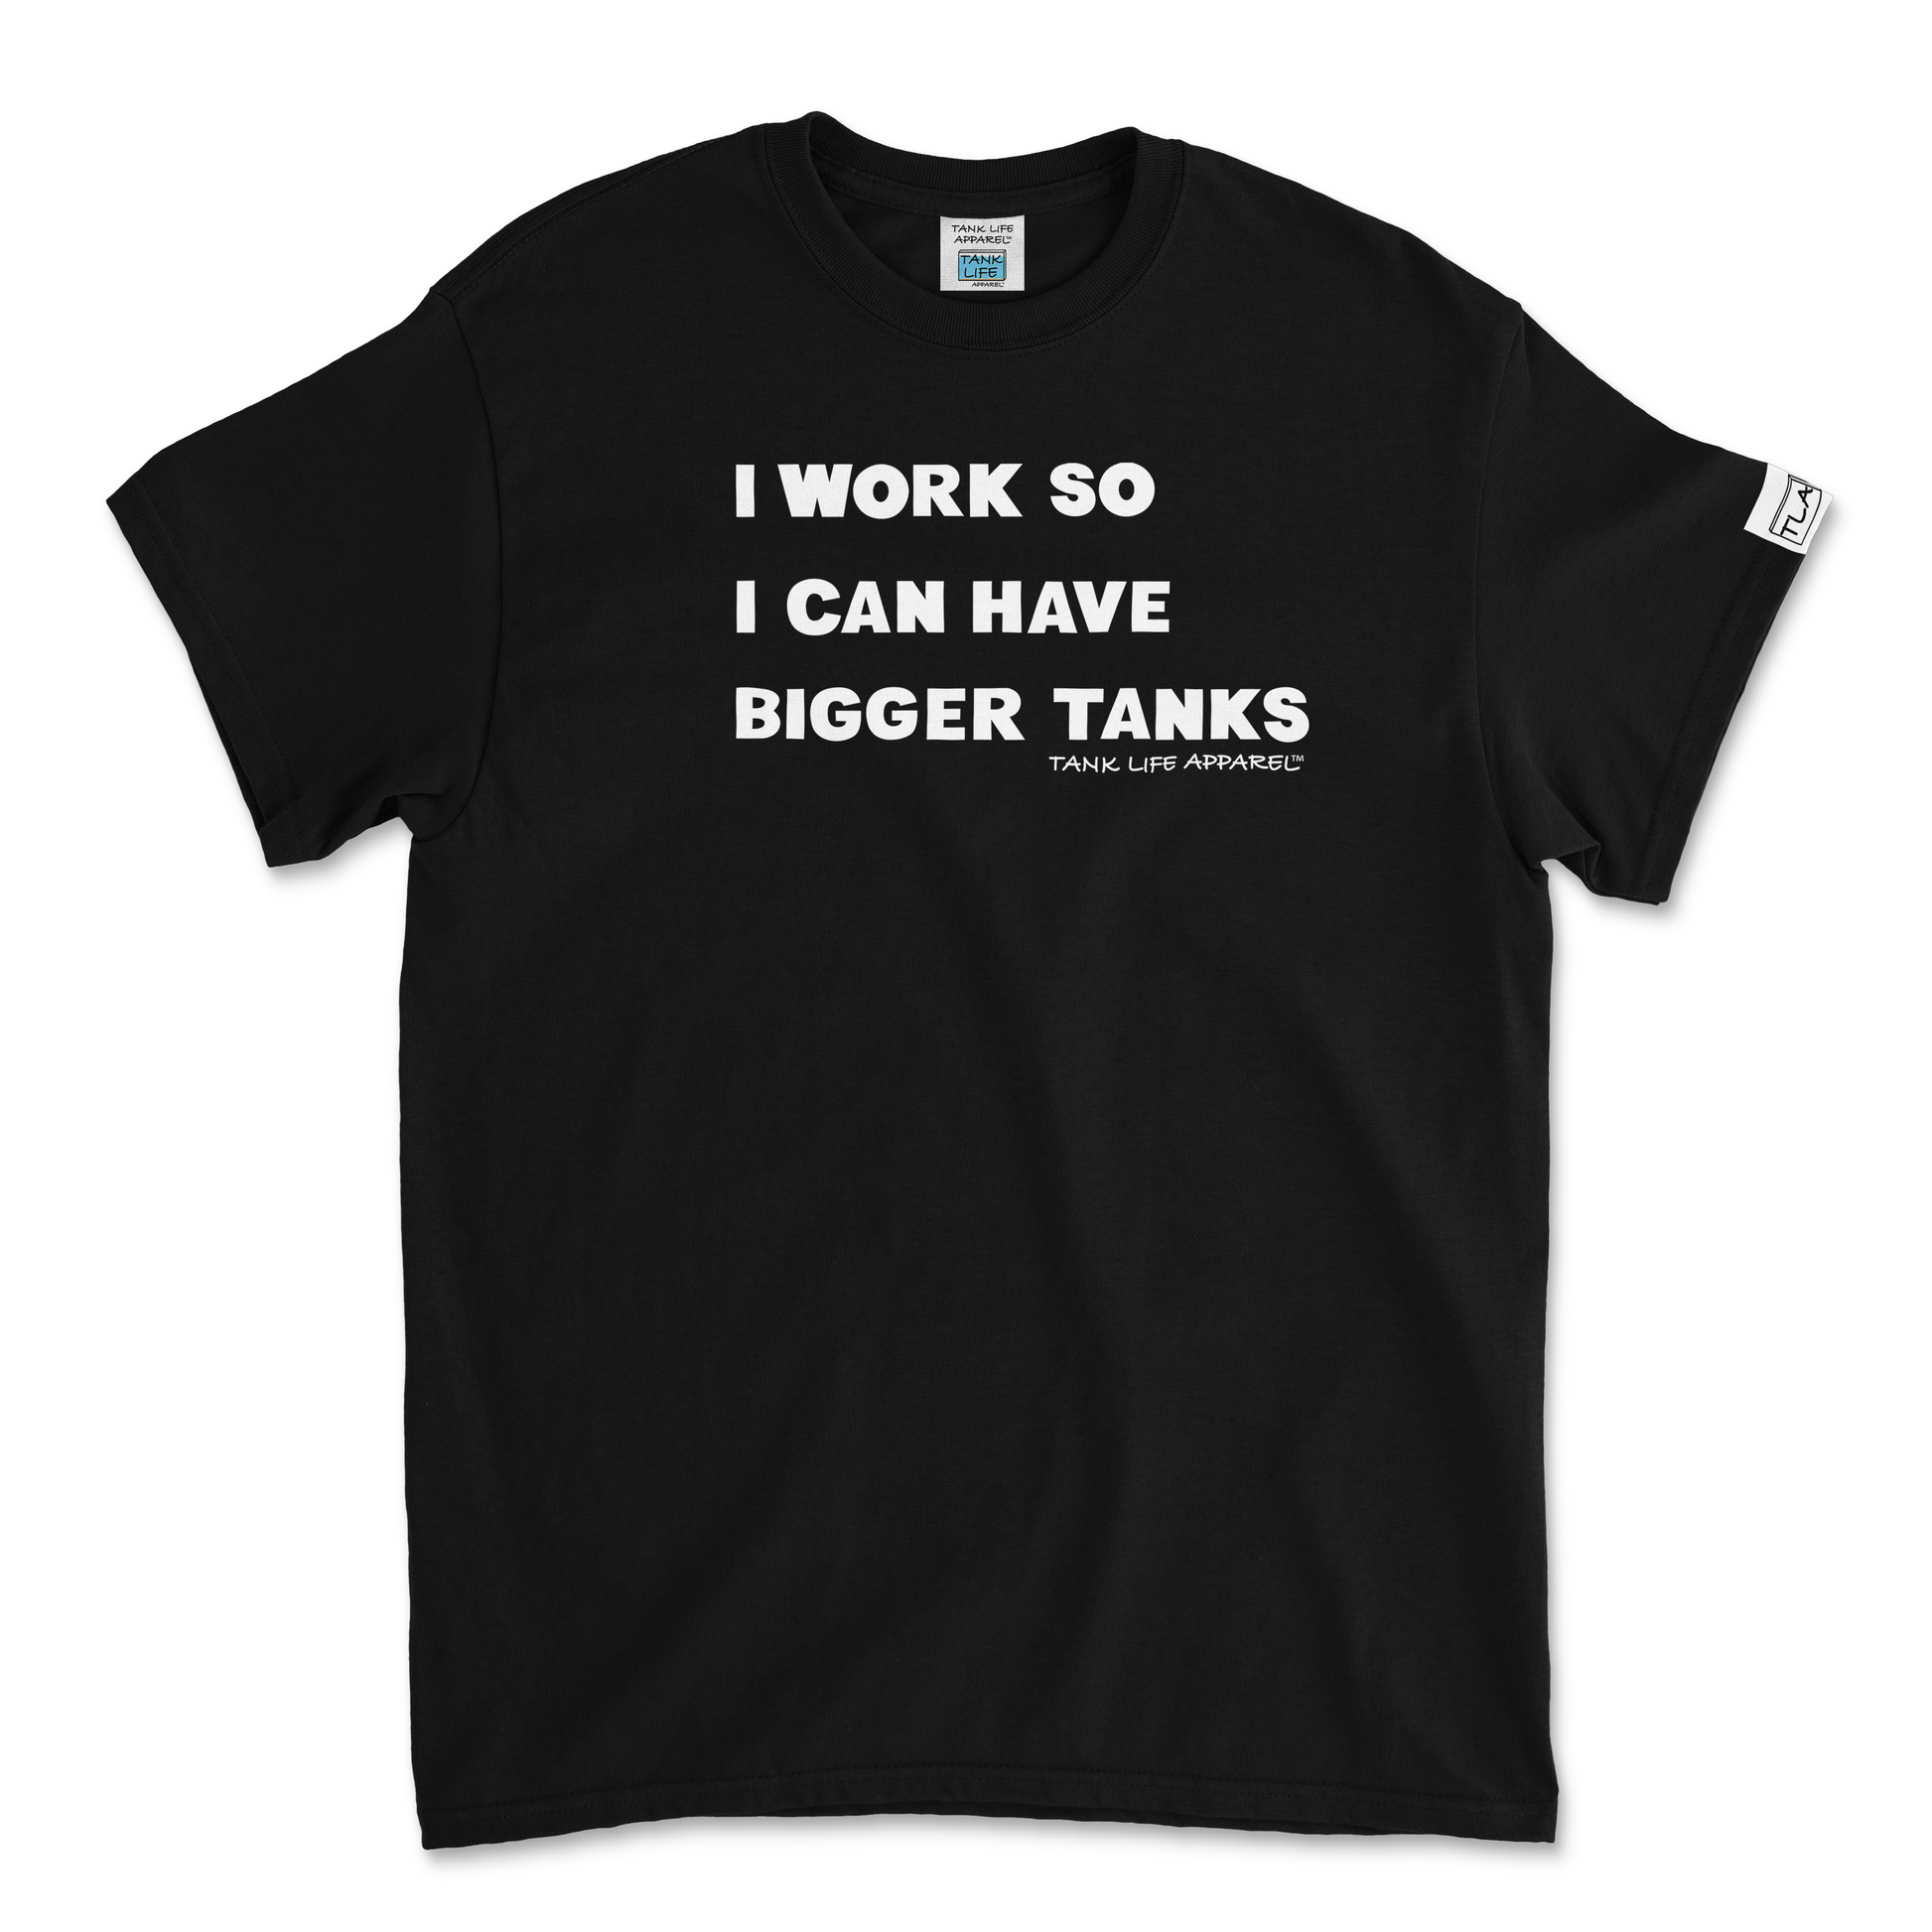 Tank Life Apparel "I work so I can have bigger tanks" design on a classic tee with our custom TLA sleeve label that gives this shirt an elevated look.